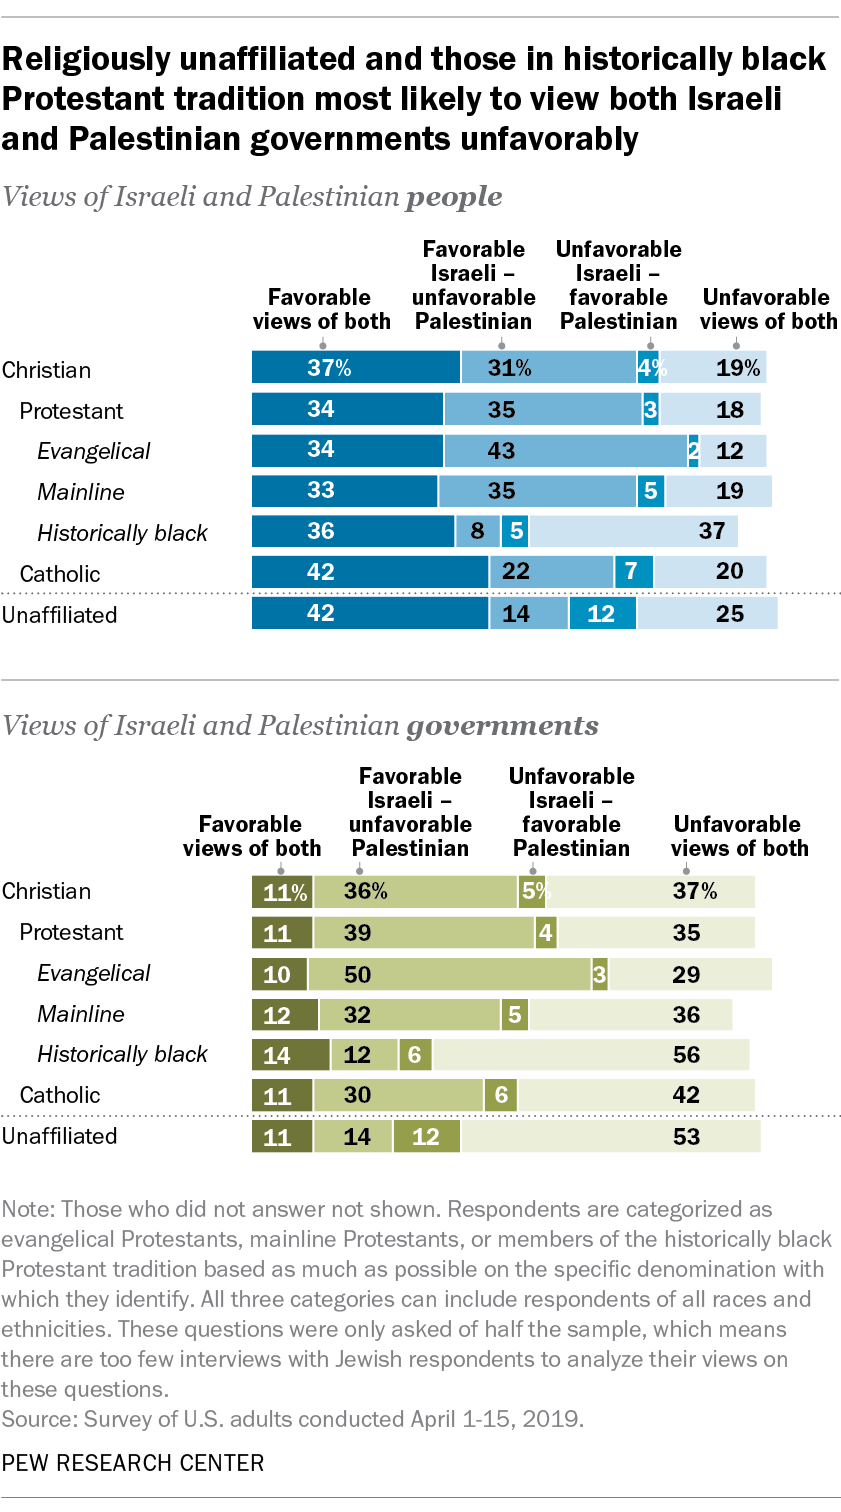 Religiously unaffiliated and those in historically black Protestant tradition most likely to view both Israeli and Palestinian government unfavorably